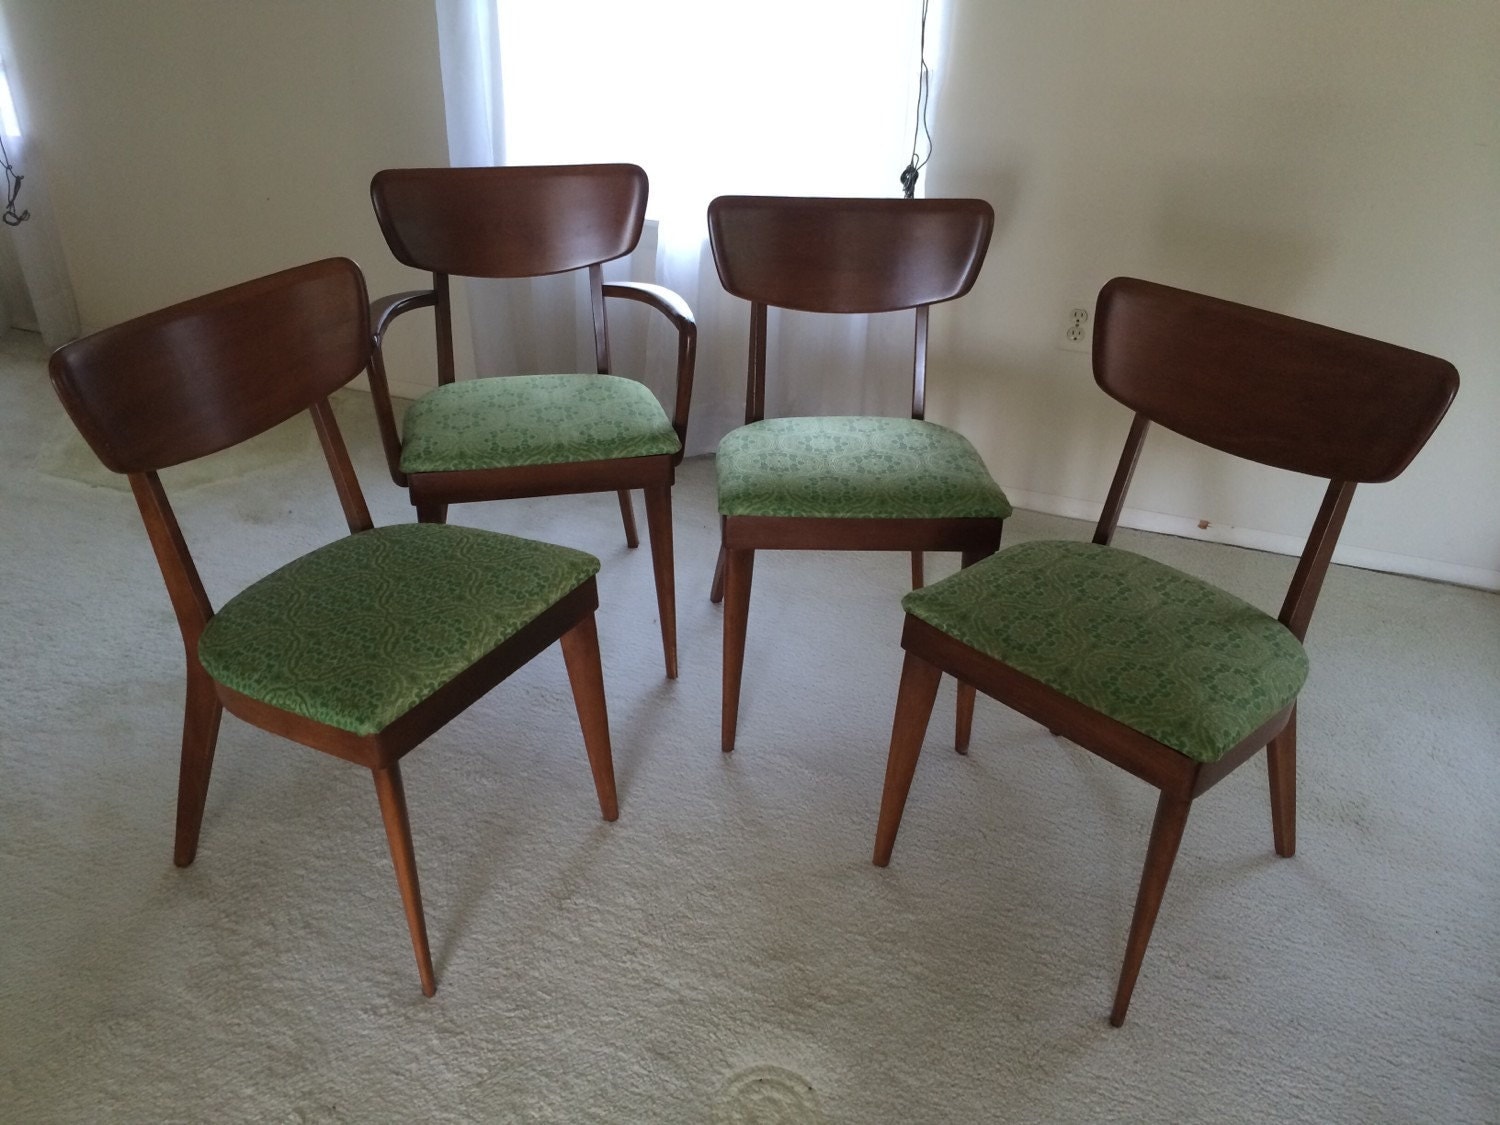 haywood wakefield dining room chairs